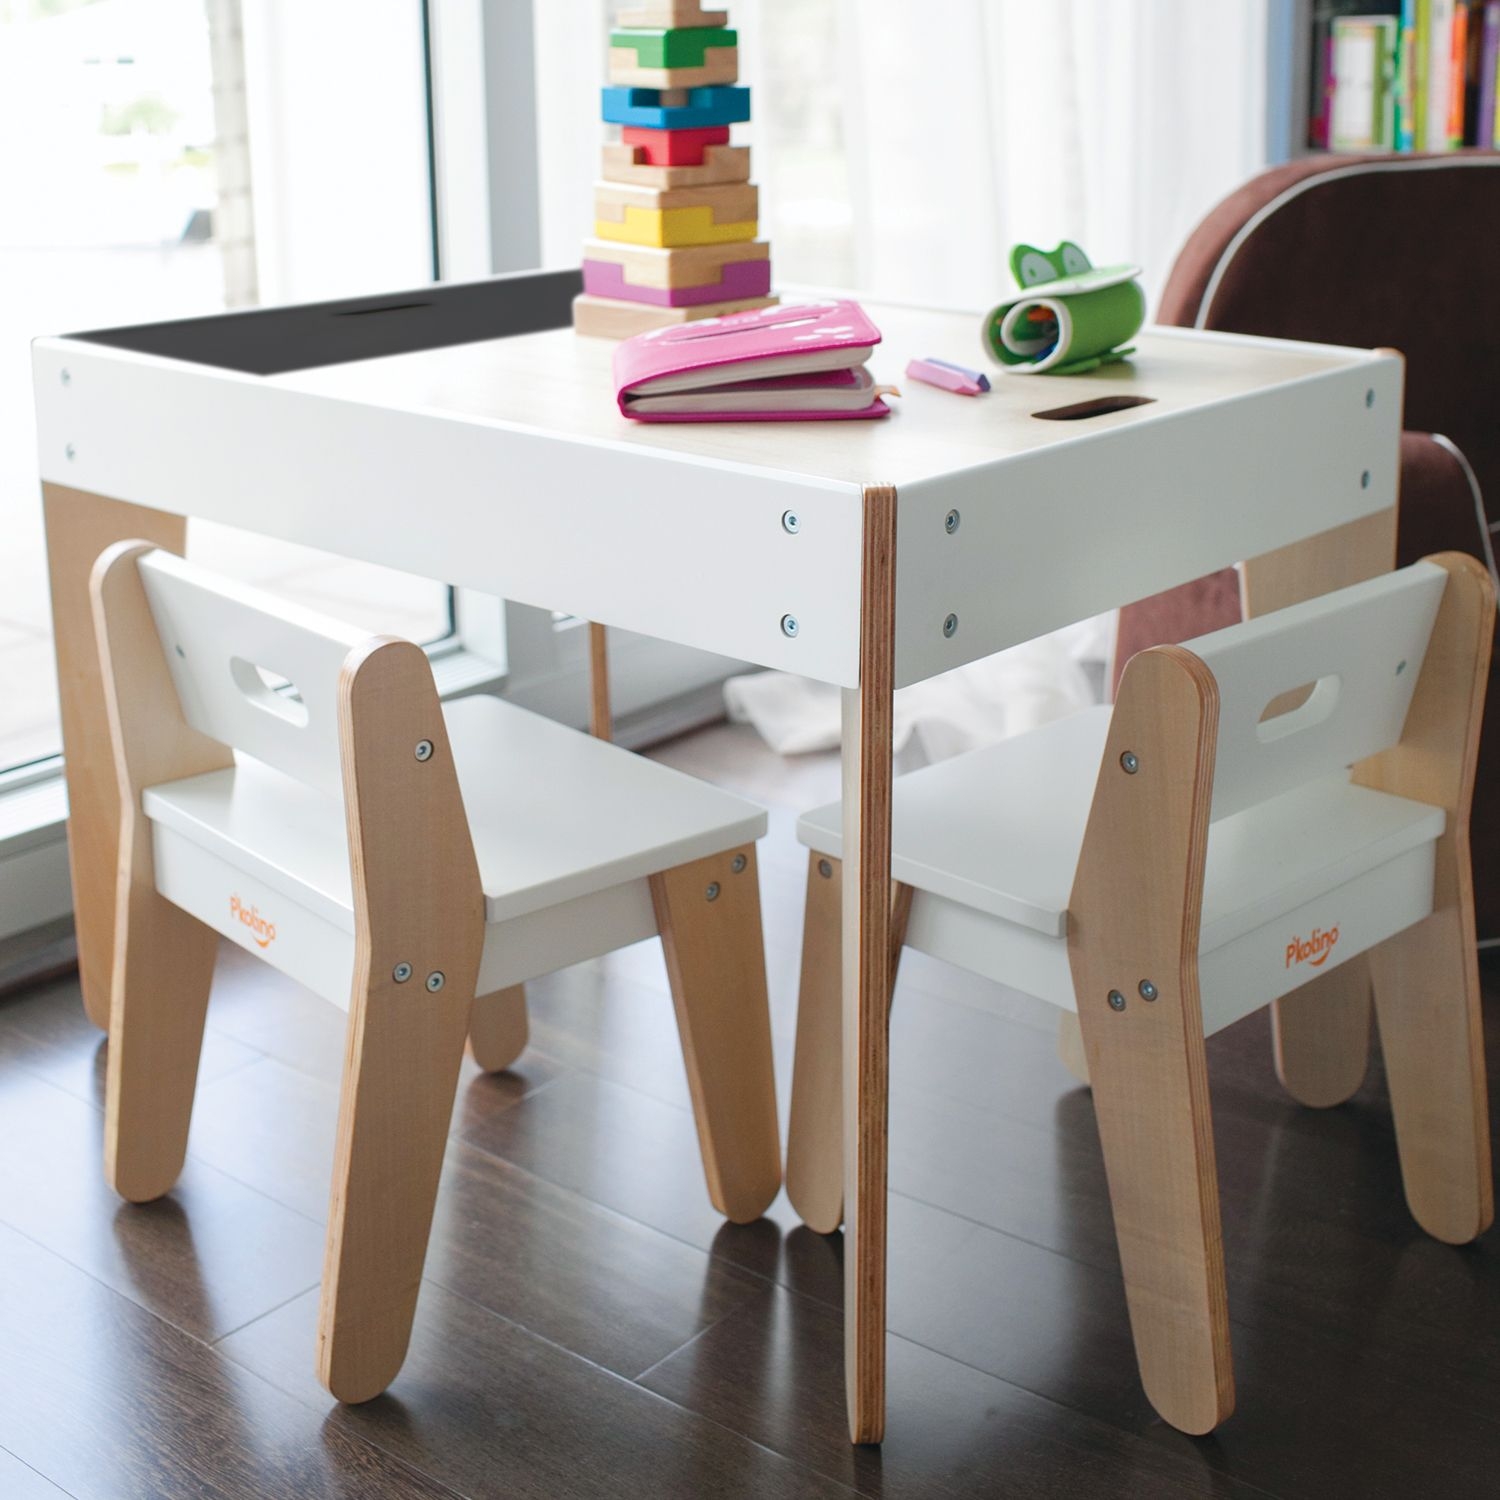 children's dinner table and chairs